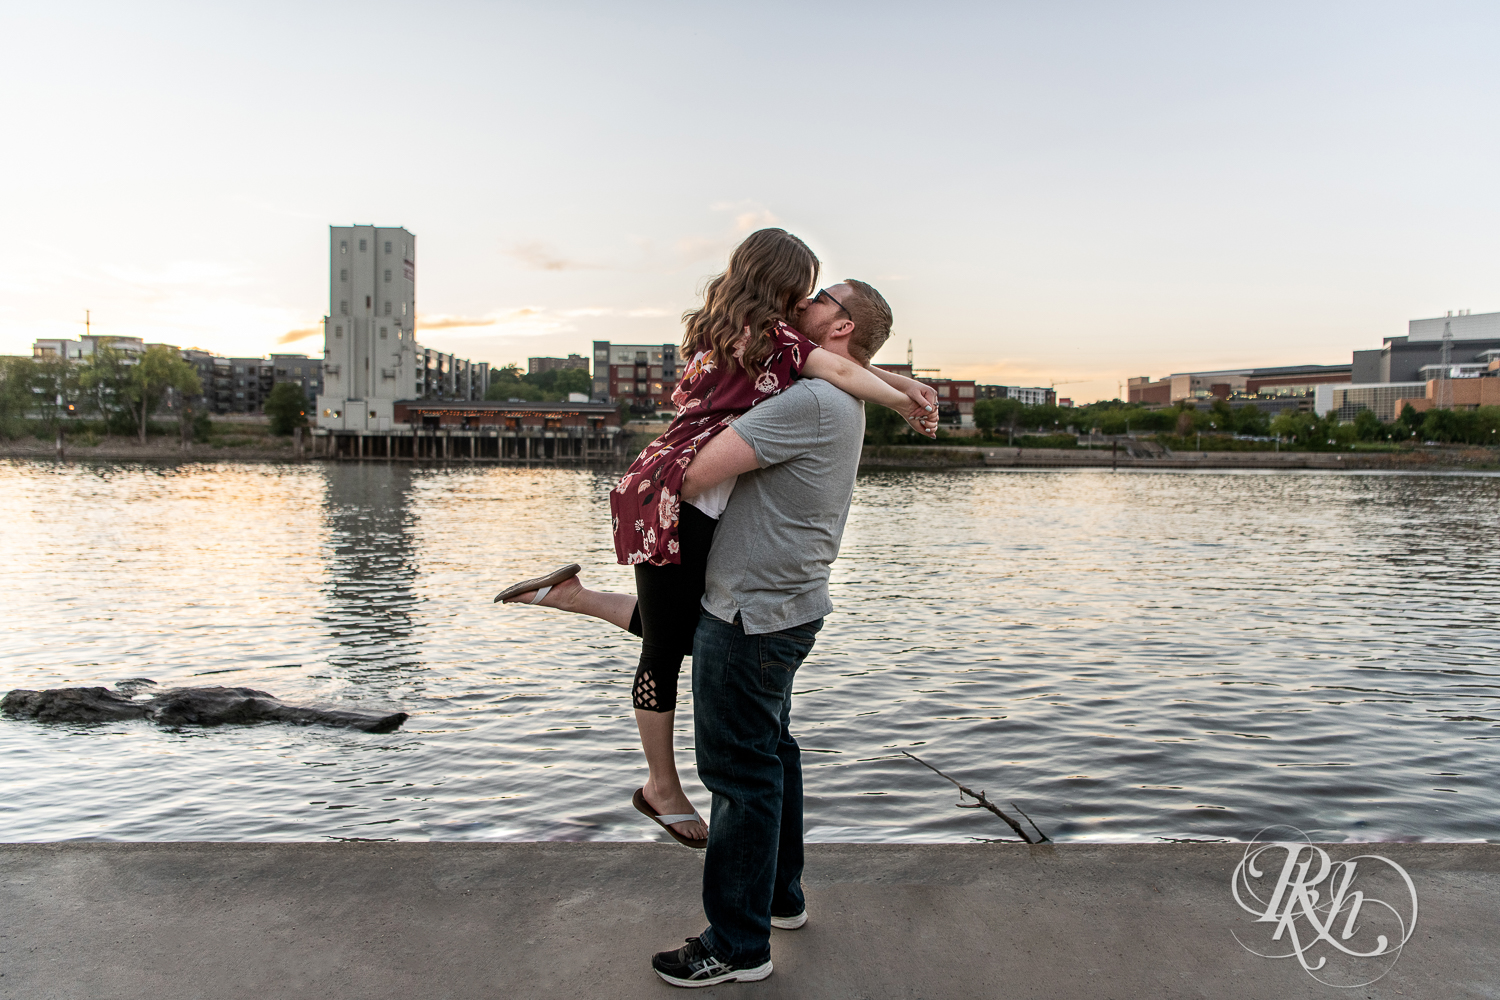 Man lifts and kisses woman with city in background during golden hour on Harriet Island in Saint Paul, Minnesota.